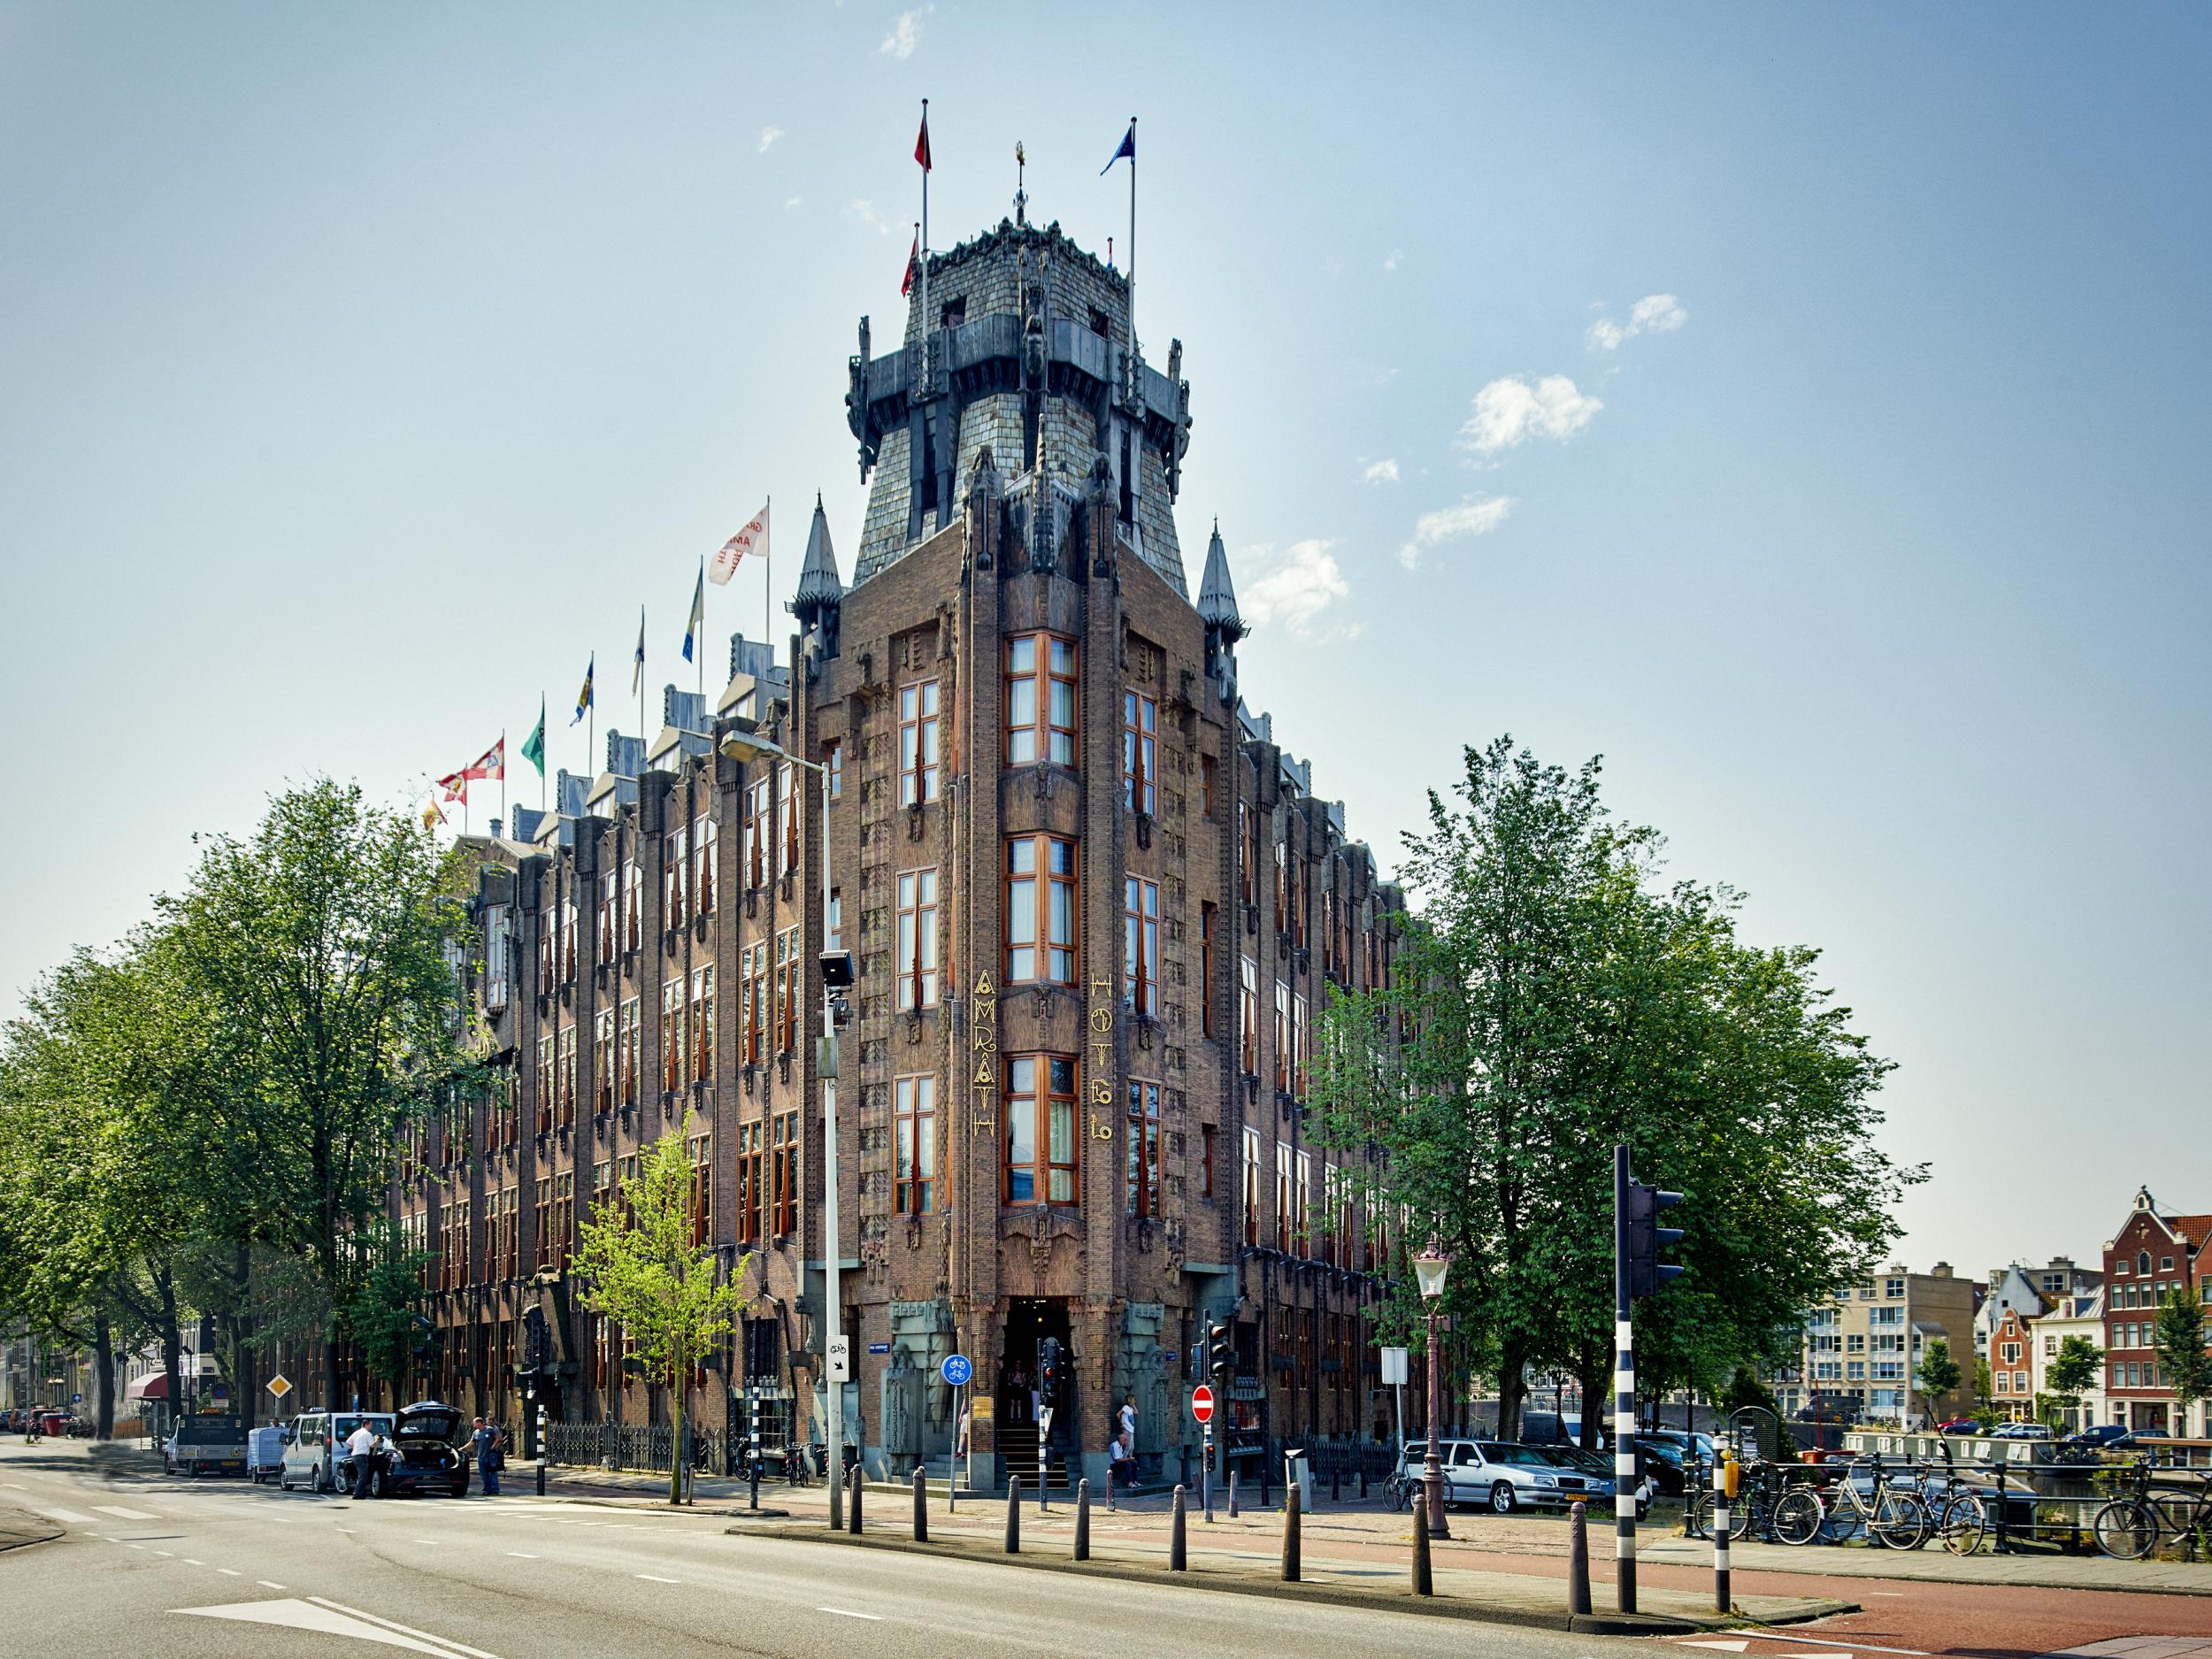 Grand Hotel Amrâth is housed in the former Scheepvaarthuis